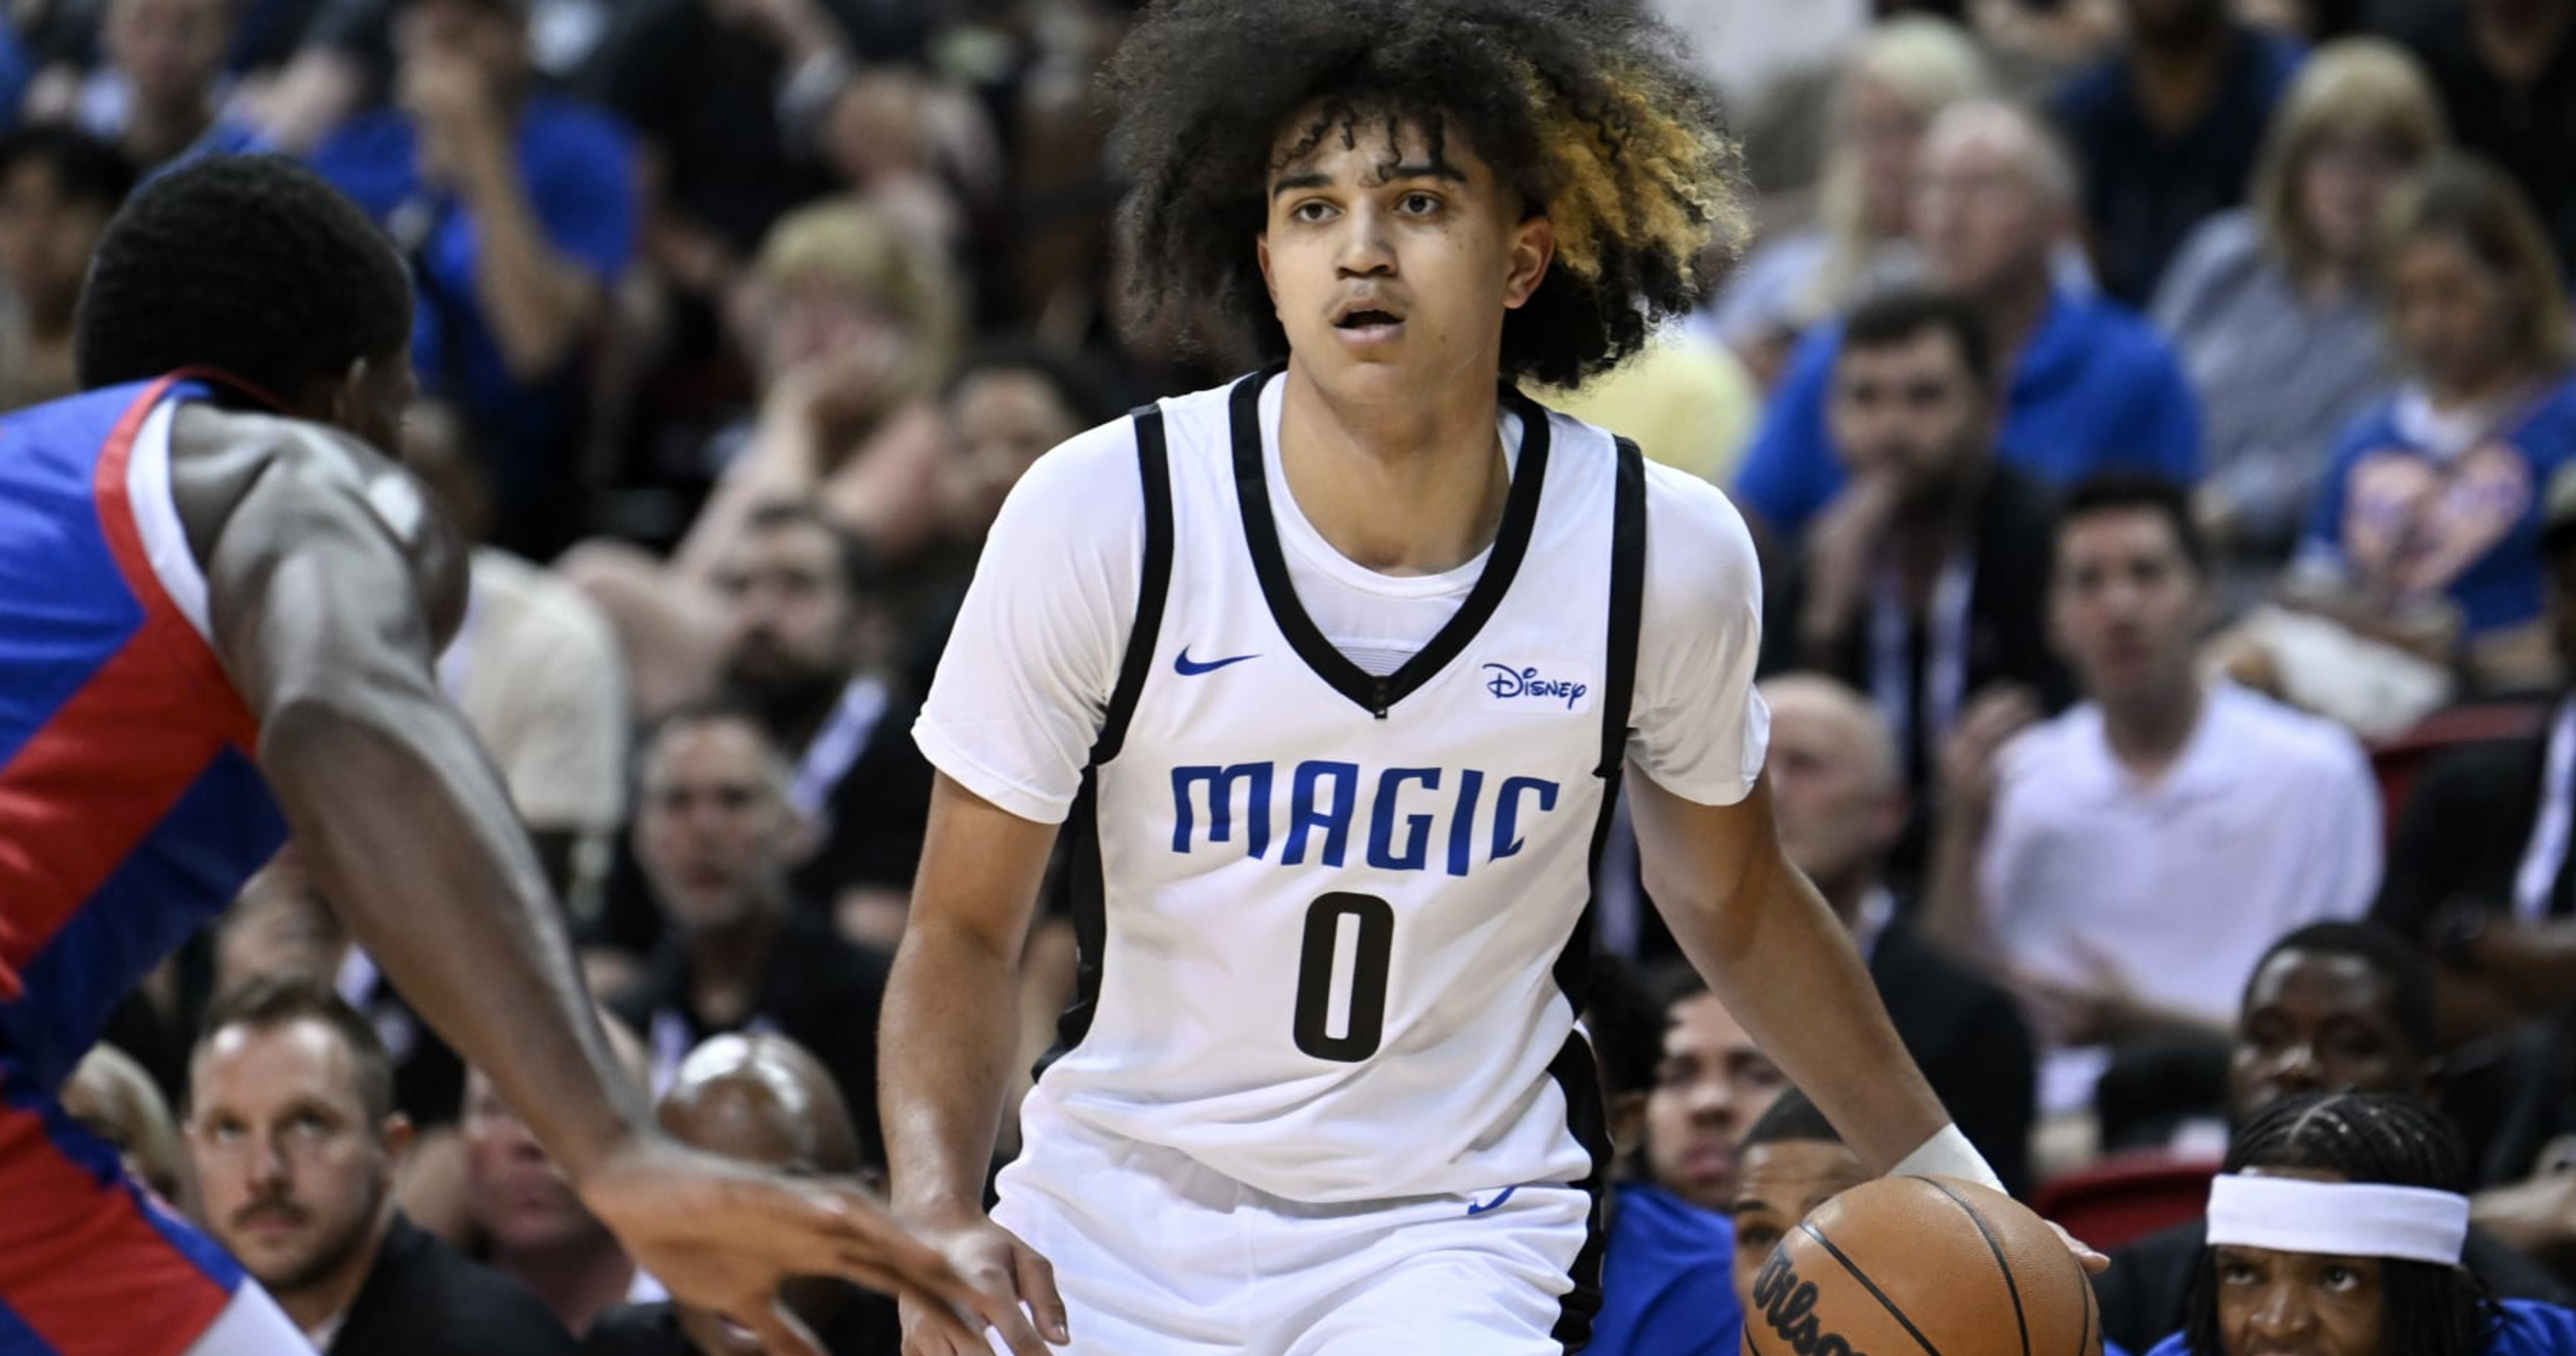 Magic 202324 Schedule Top Games, Championship Odds and Record